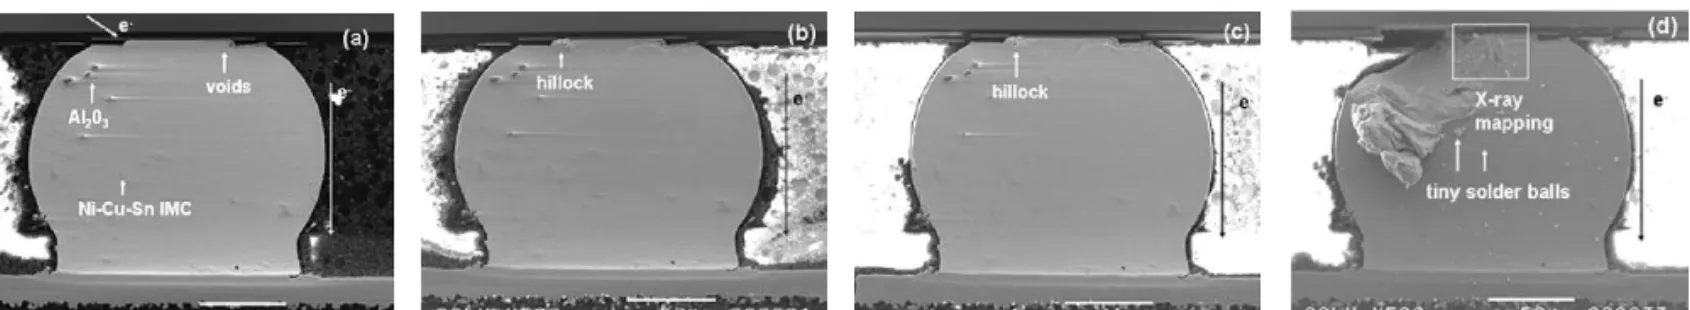 Fig. 4. The cross-sectional SEM images of the solder bump stressed at 100°C for (a) 0 h, (b) 20 h, (c) 264 h, and (d) 408 h.